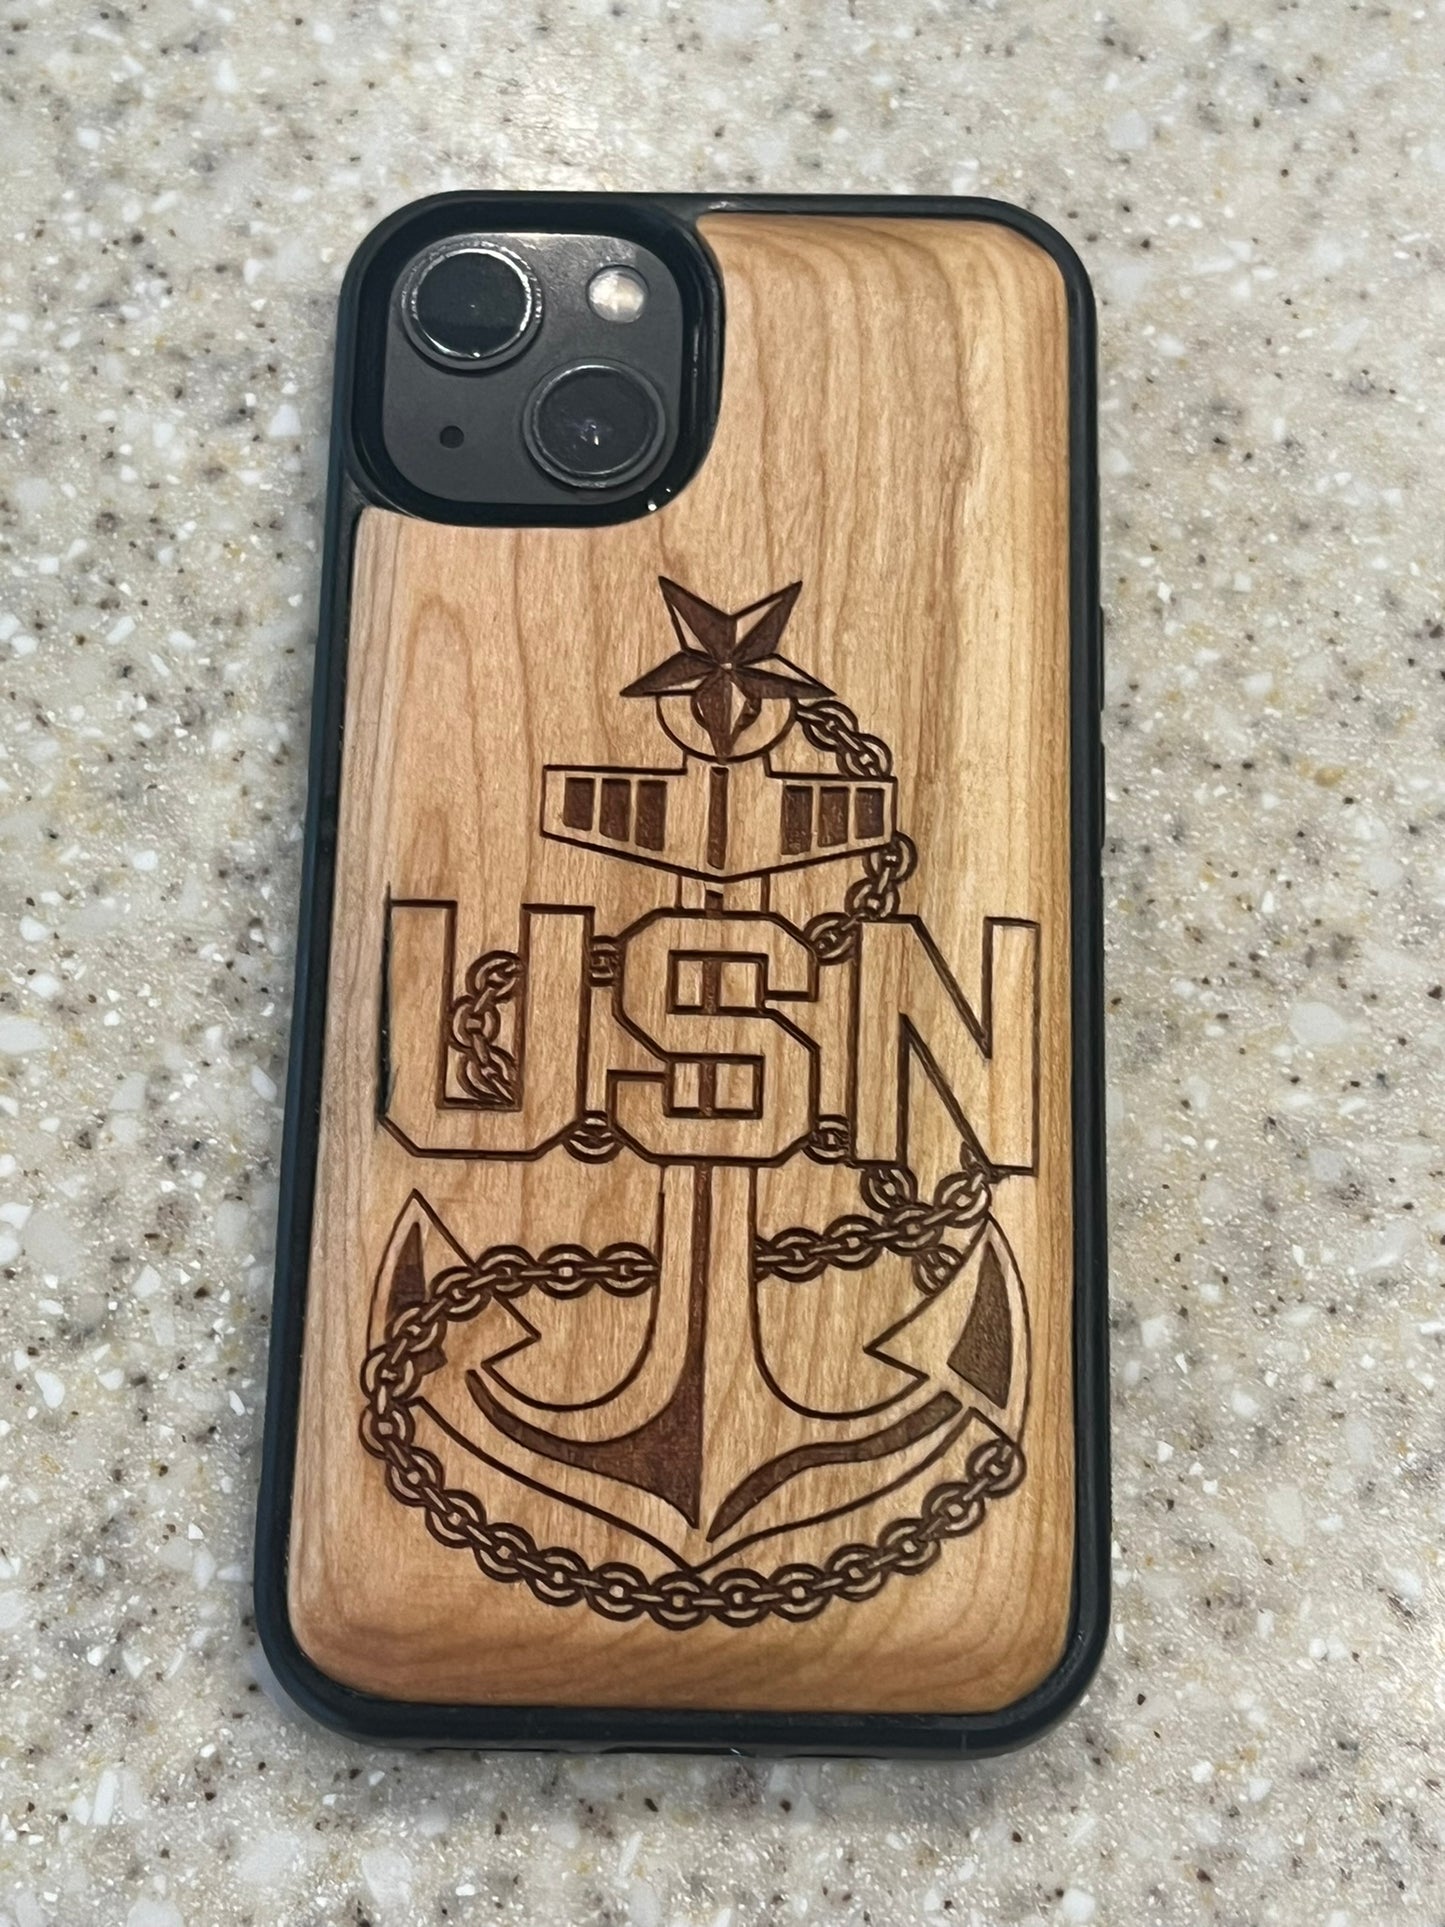 Navy Chief Wood Cell Phone Covers